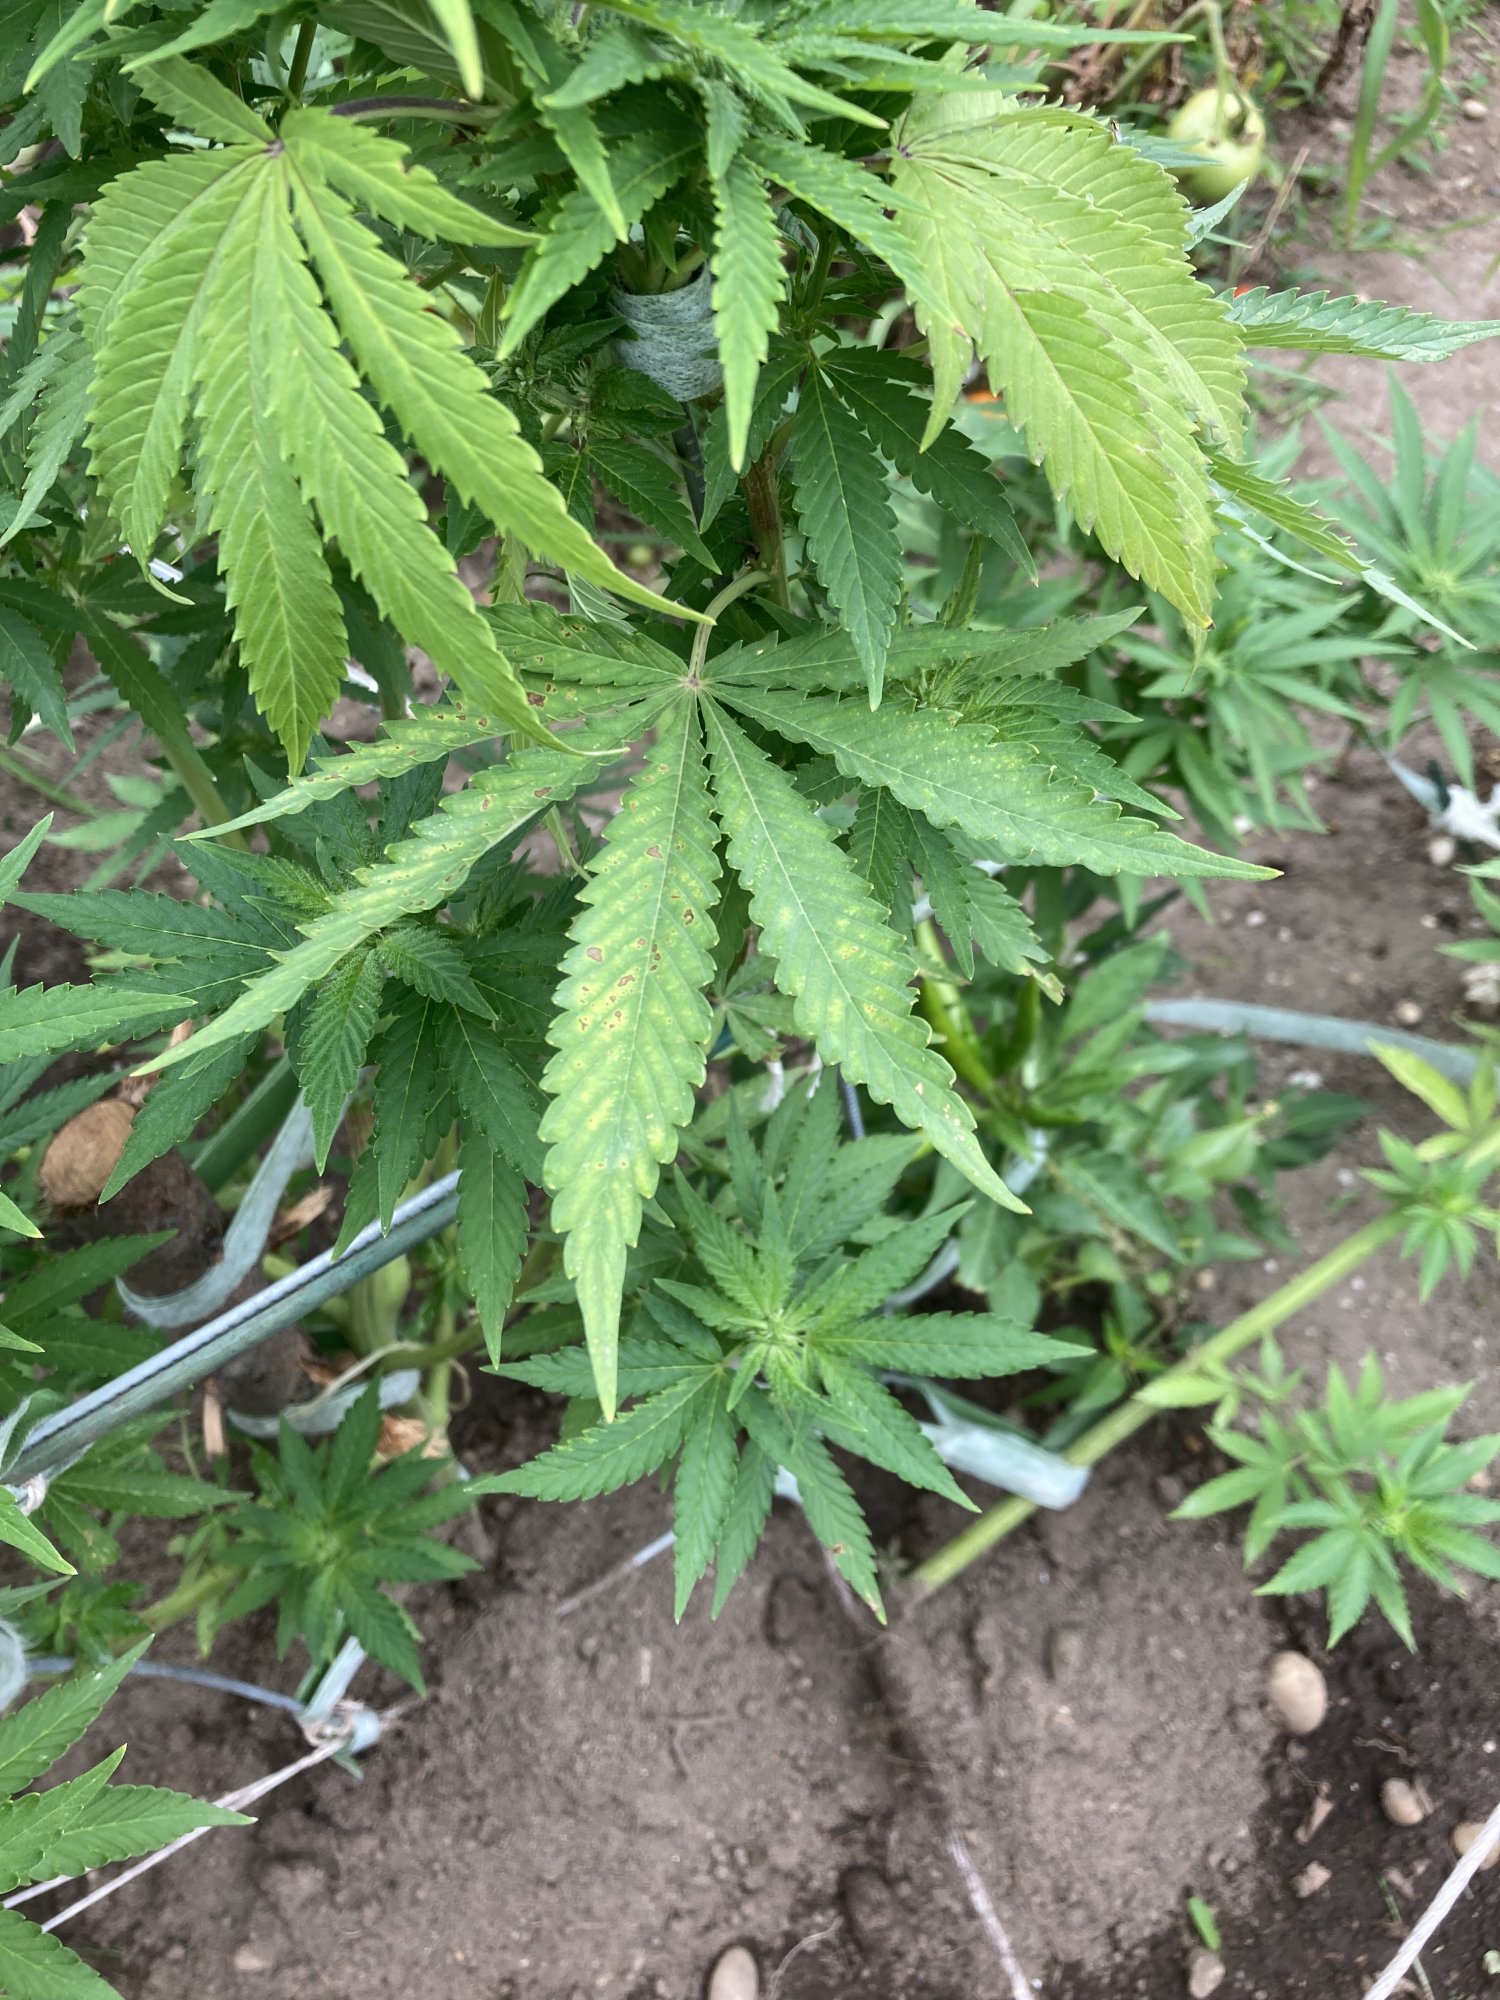 Unsure of nutrient burn or possible other issue outdoors first grow 3